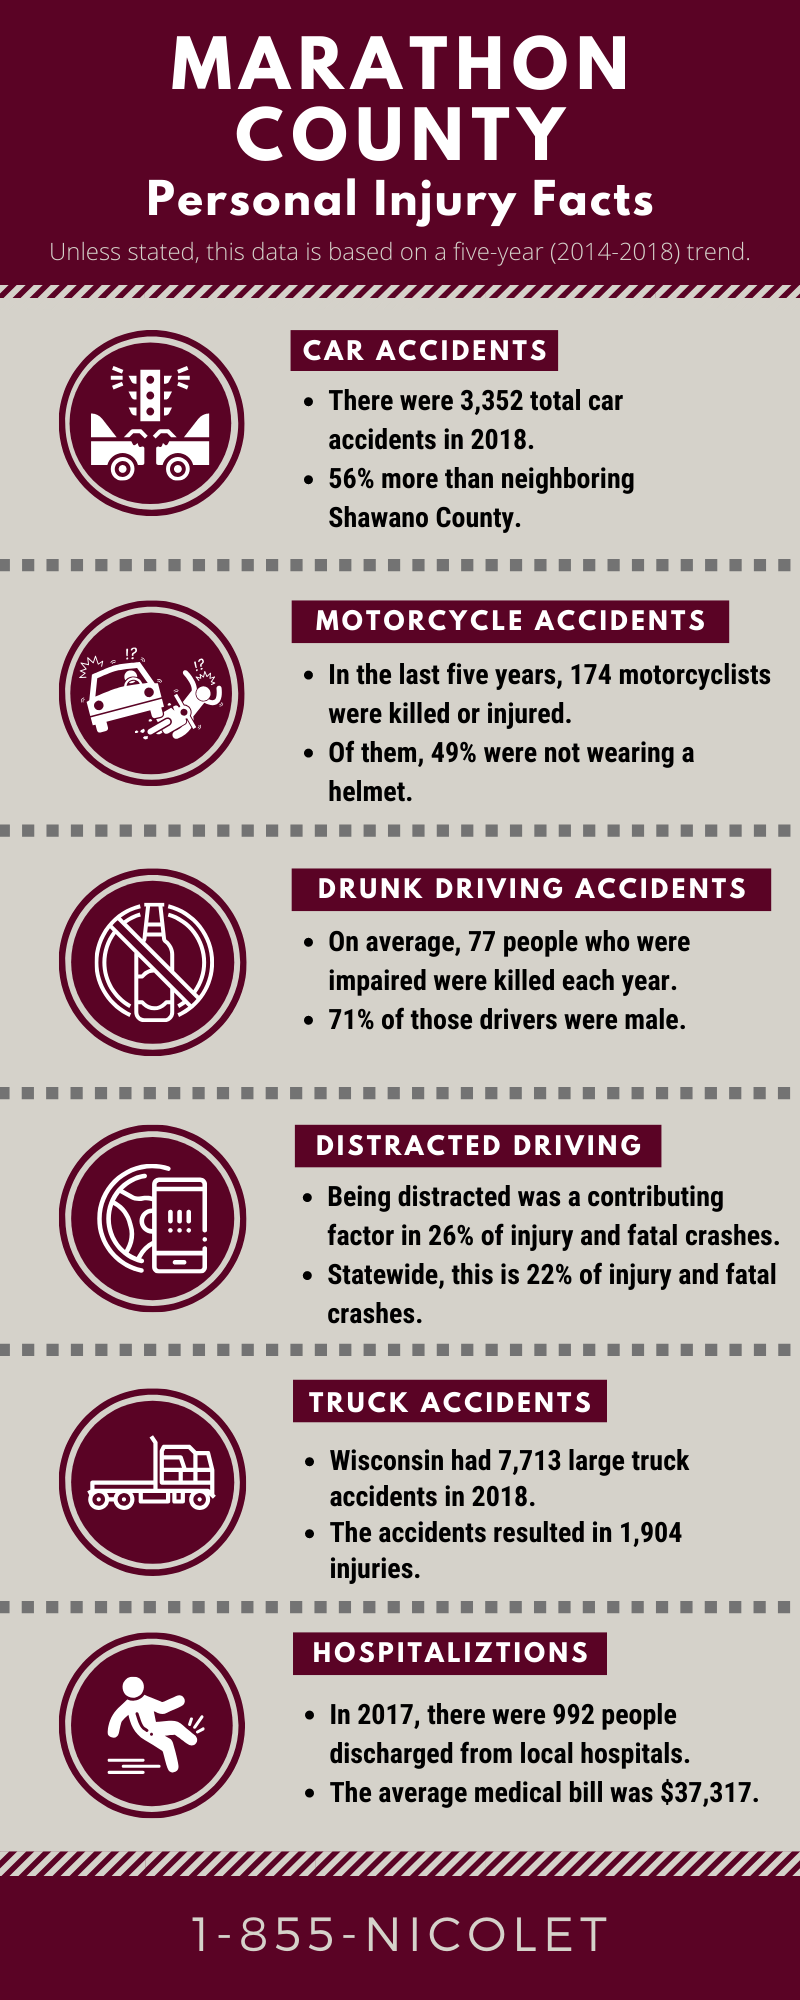 Marathon County personal injury facts infographic